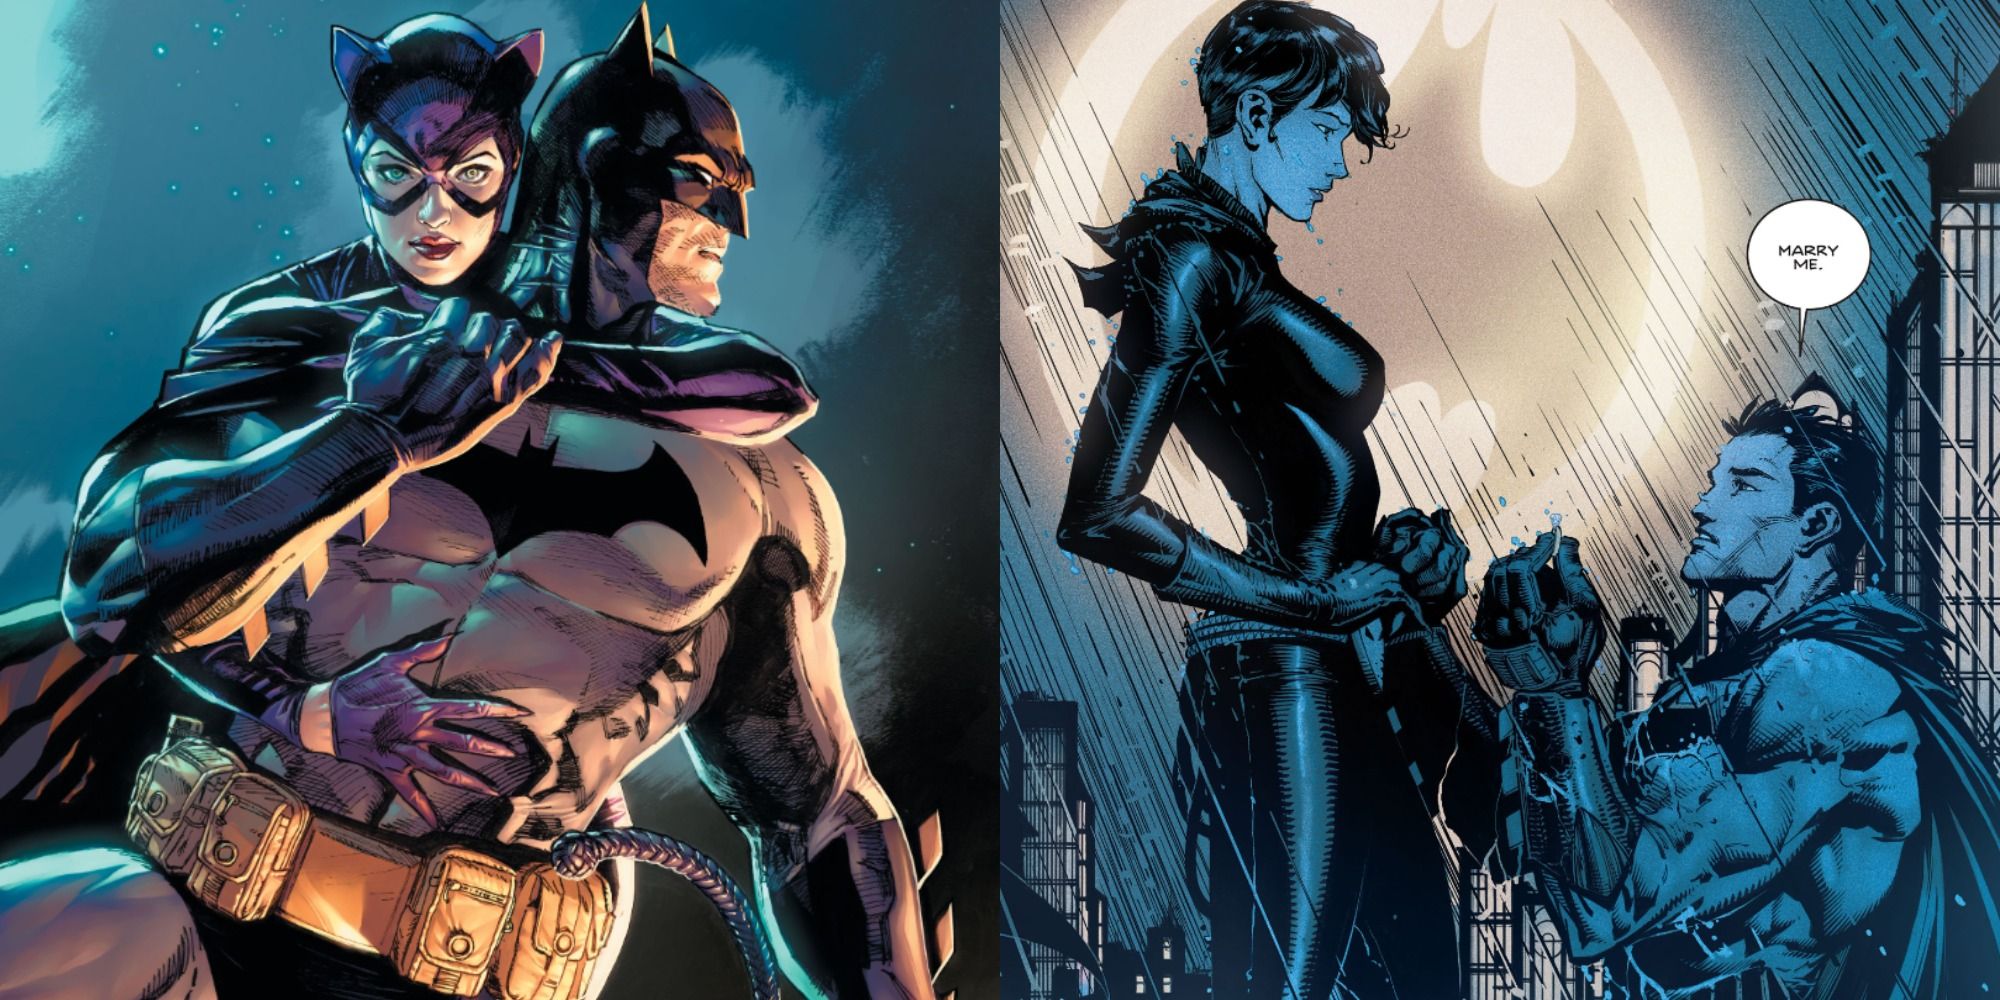 Split image of Catwoman holding Batman & Bruce proposing to Selina in DC Comics.